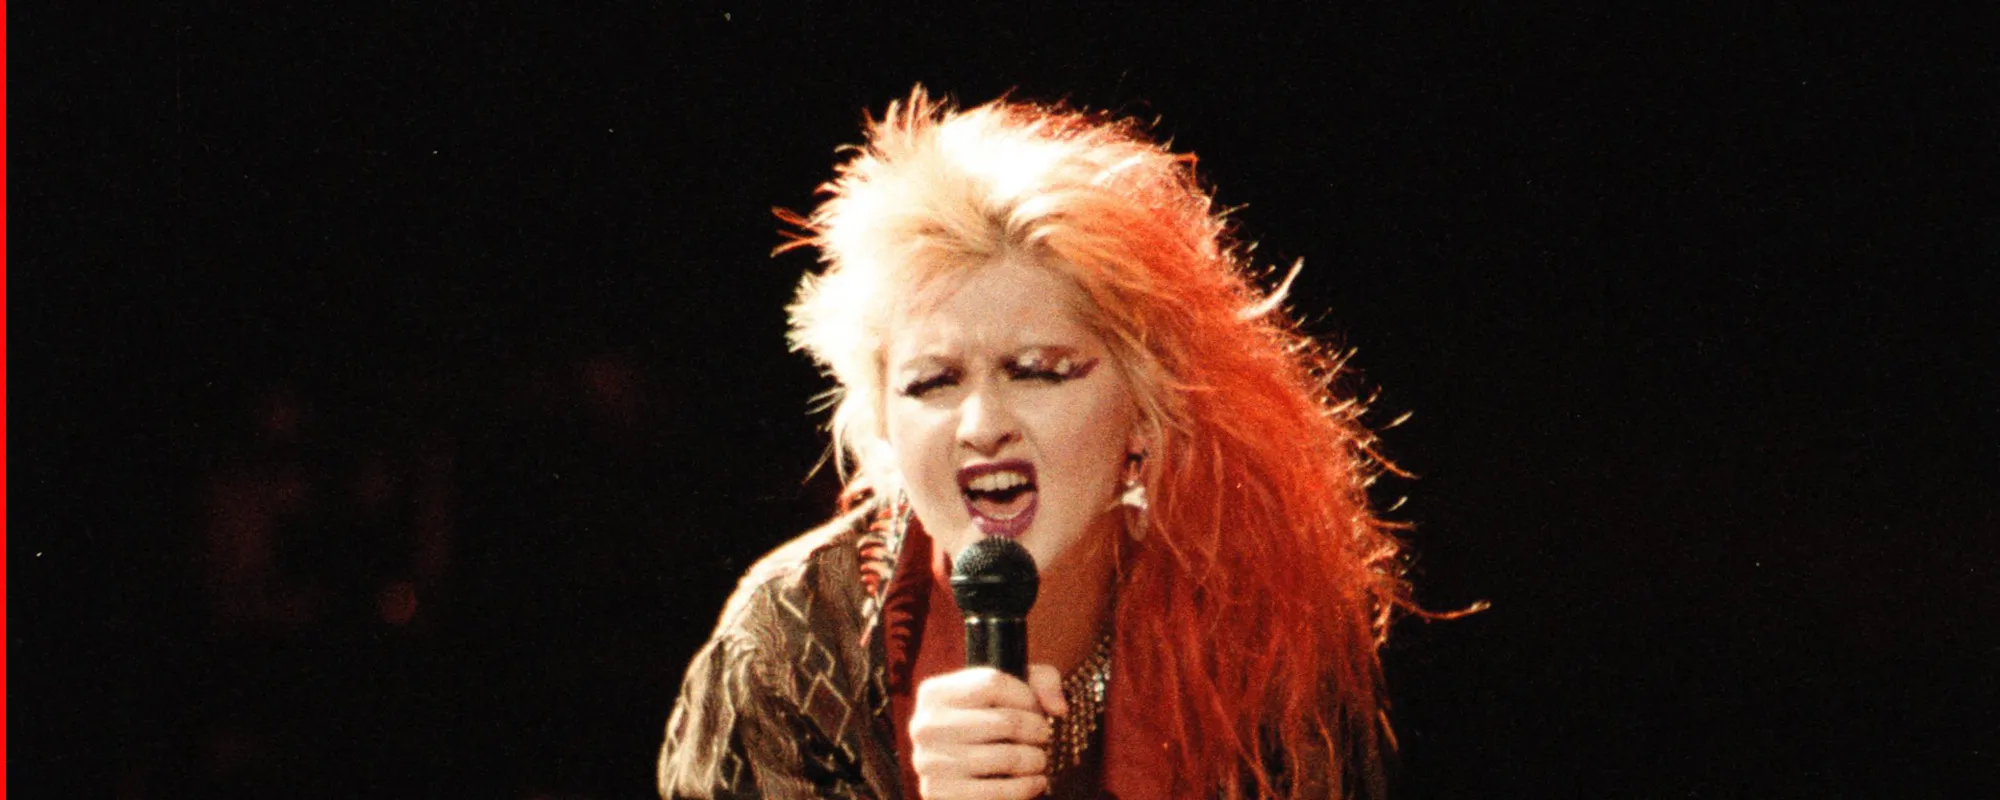 The Iridescent Meaning Behind “True Colors” by Cyndi Lauper